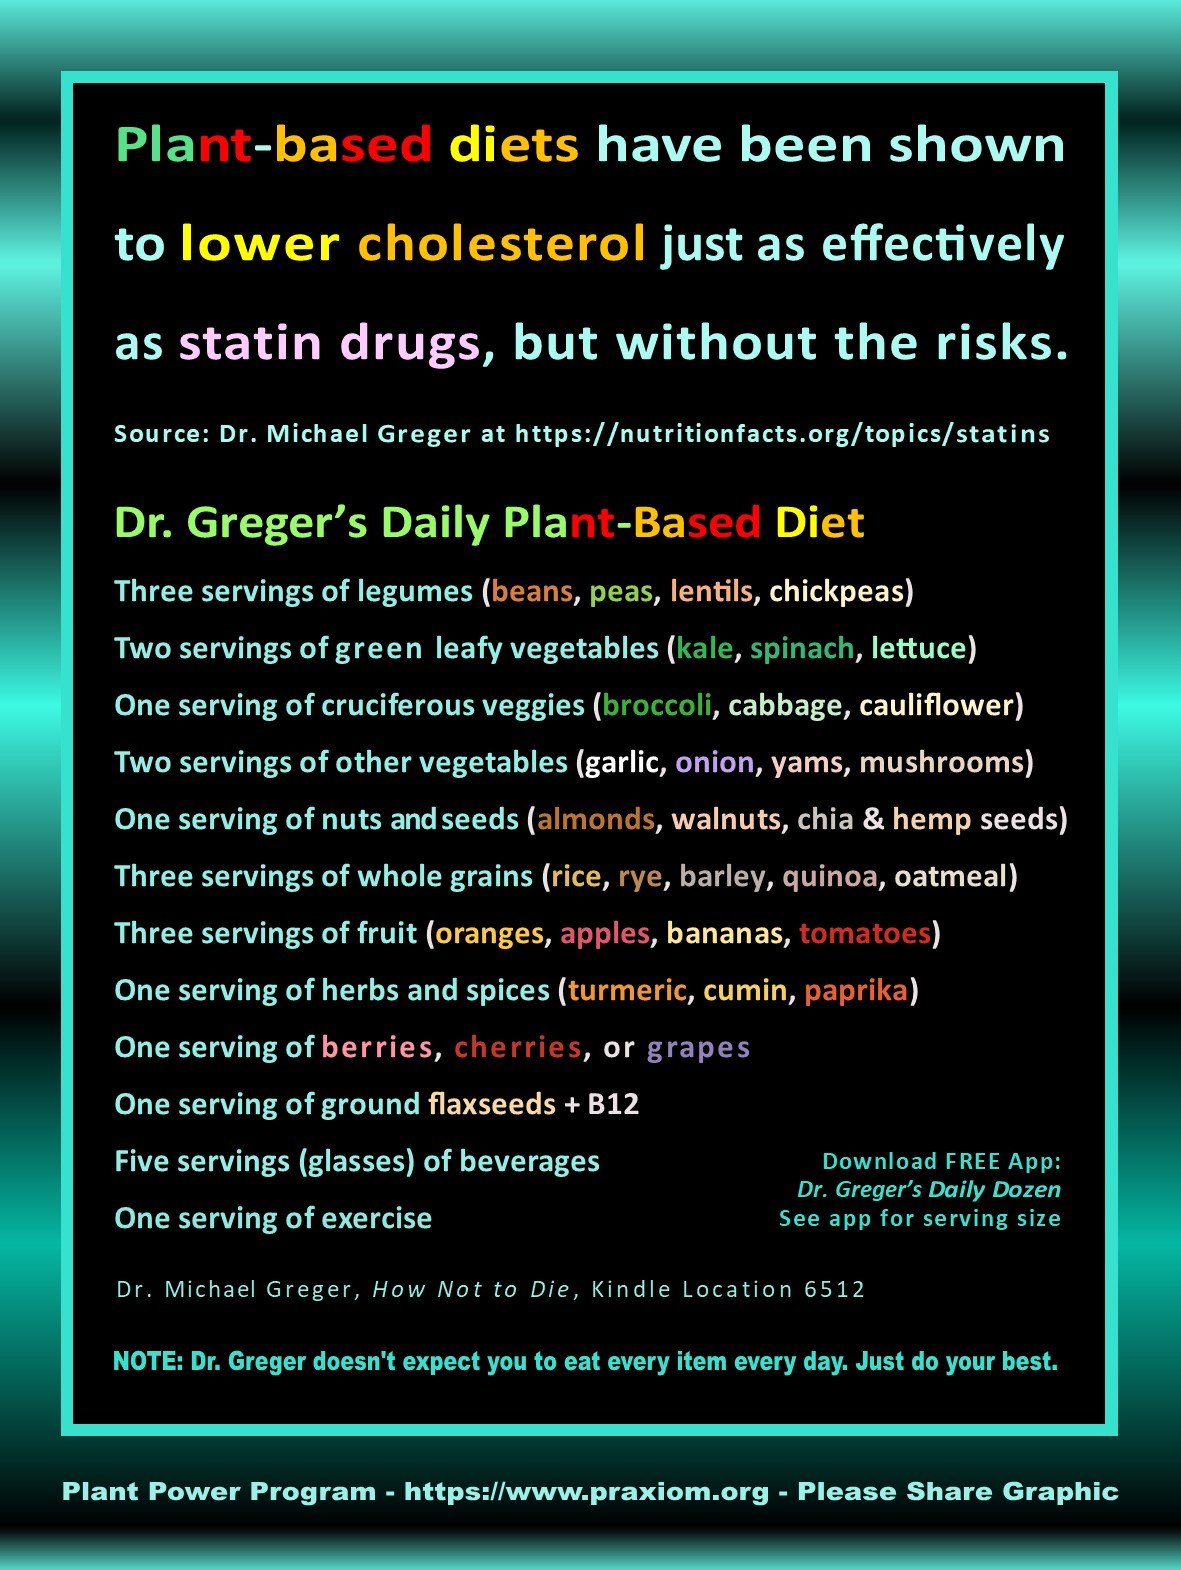 Use Plants to Lower Cholesterol